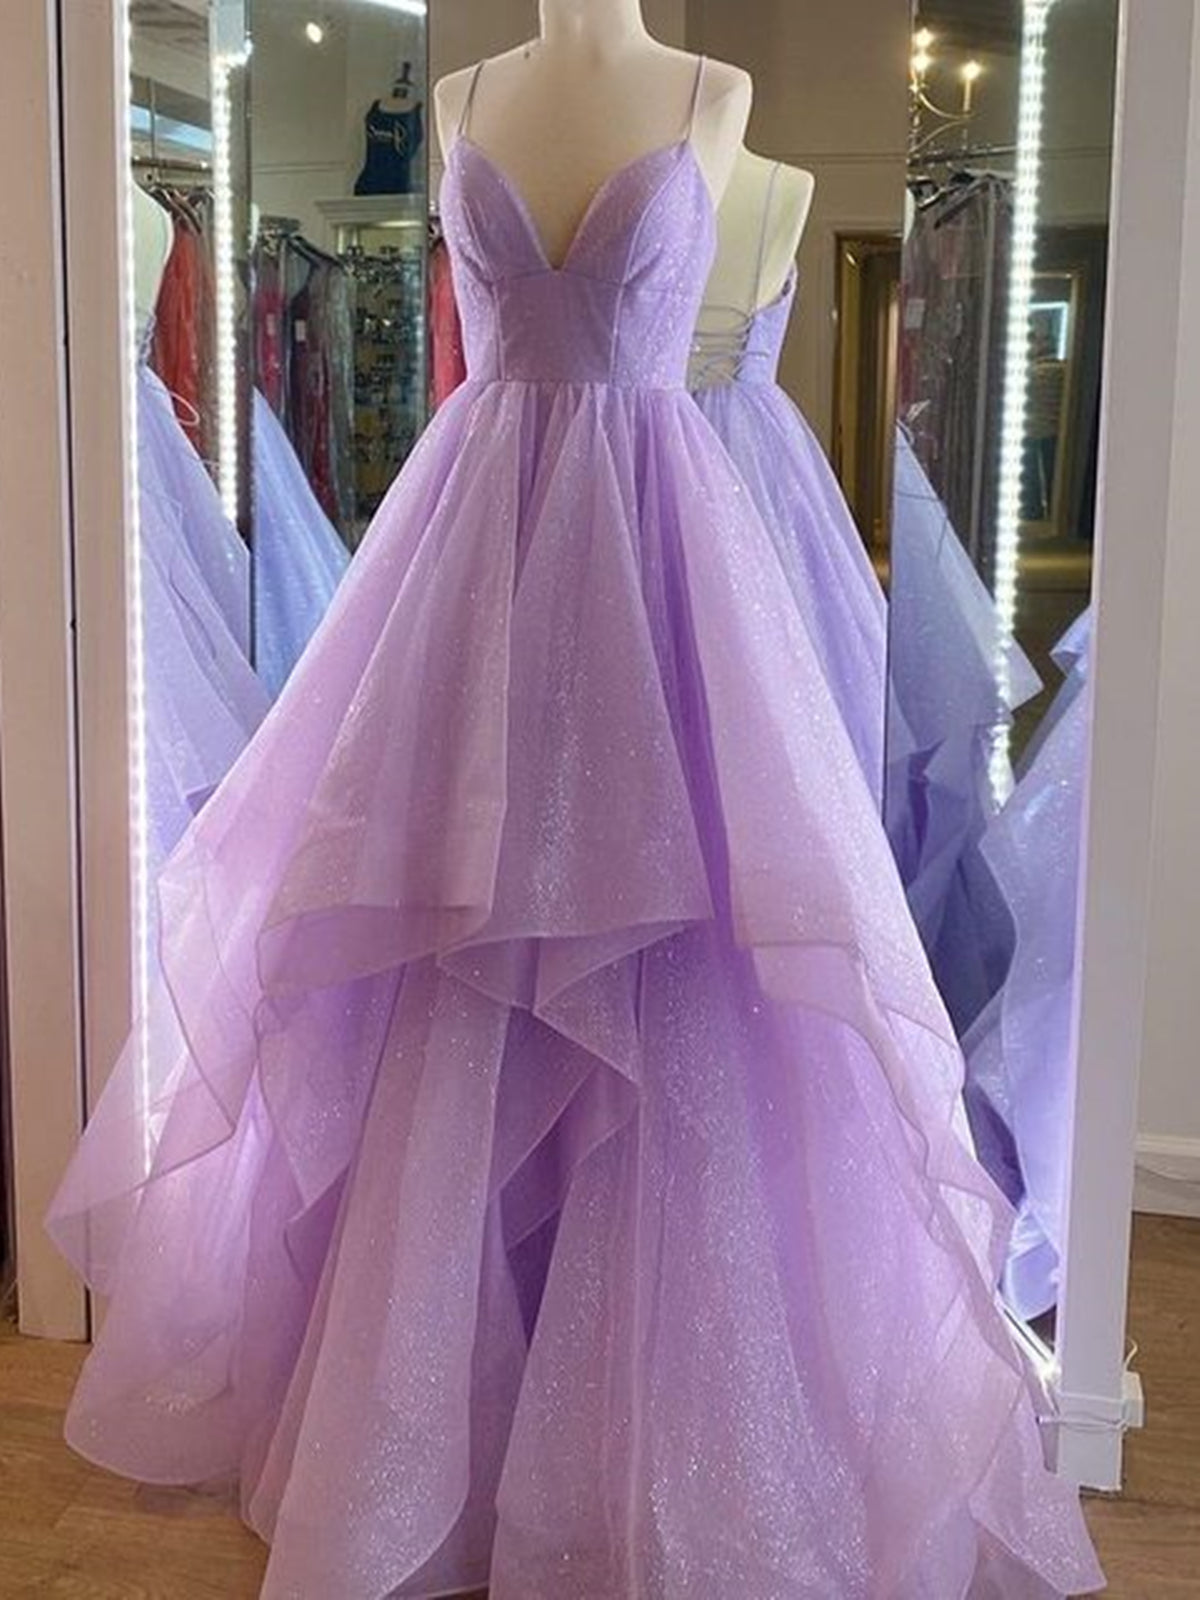 Bridesmaid Dress Gown, V Neck Purple Tulle Long Prom Dresses, Purple High Low Formal Evening Dresses